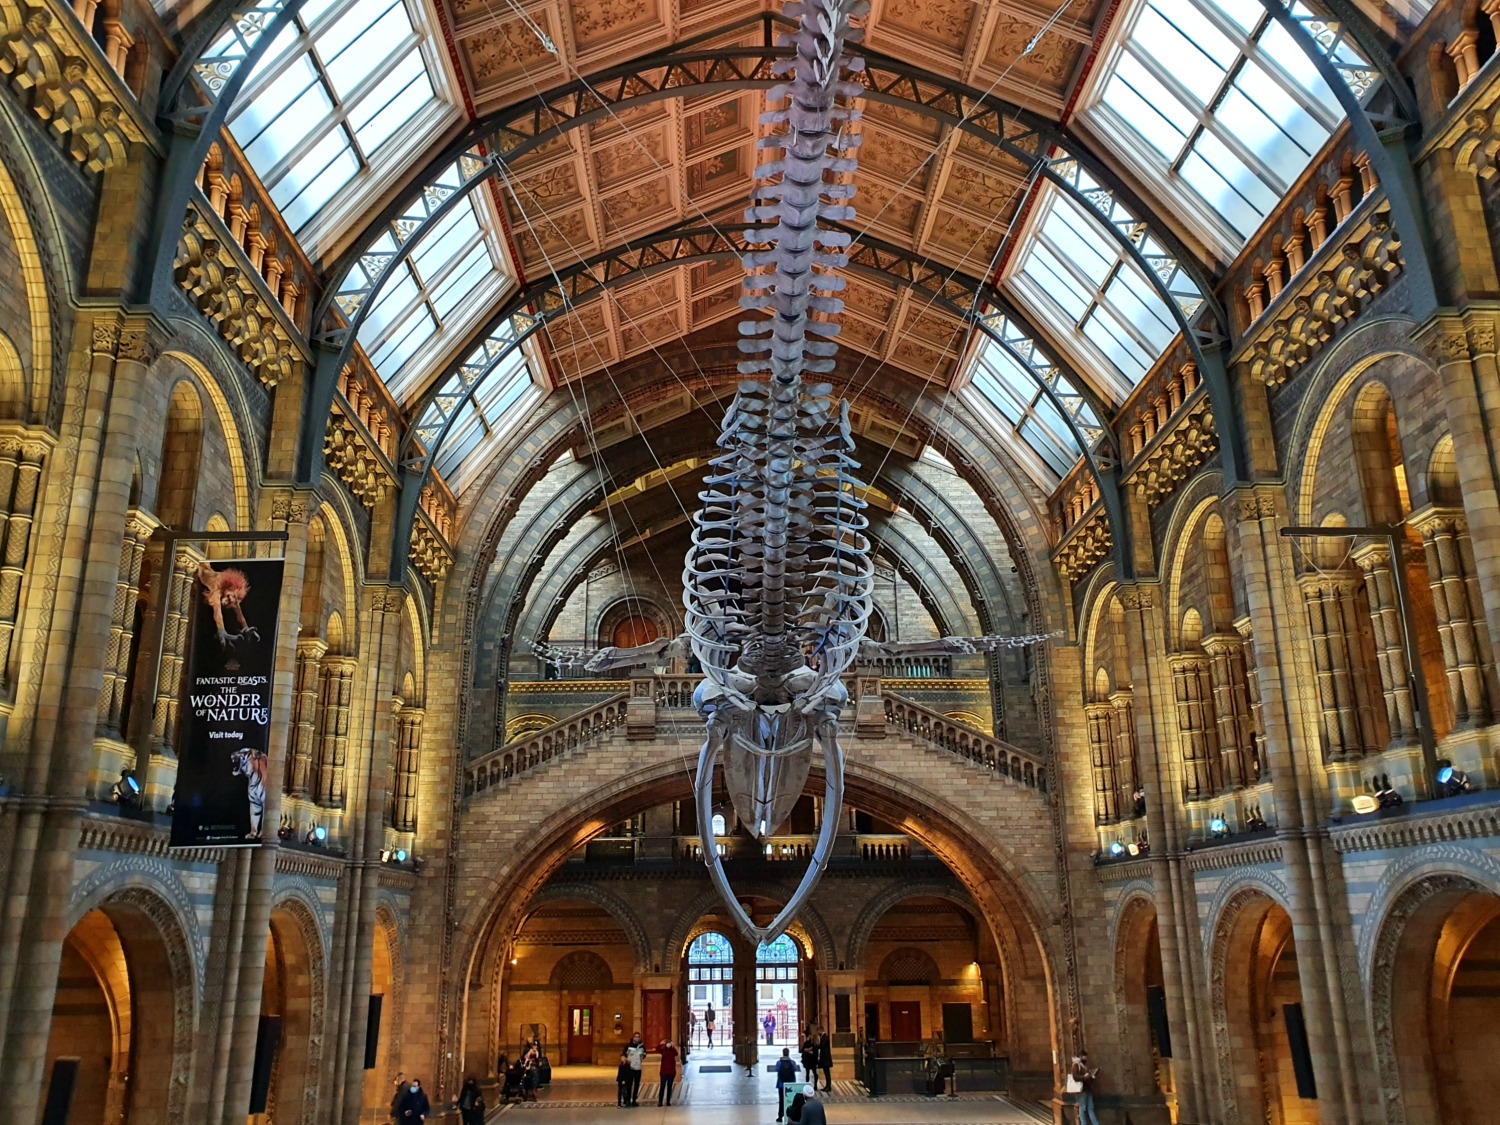 View of the whale skeleton hanging in the Hintze Hall of the Natural History Museum in London - the museum is easily one of the best things to do in South Kensington with kids